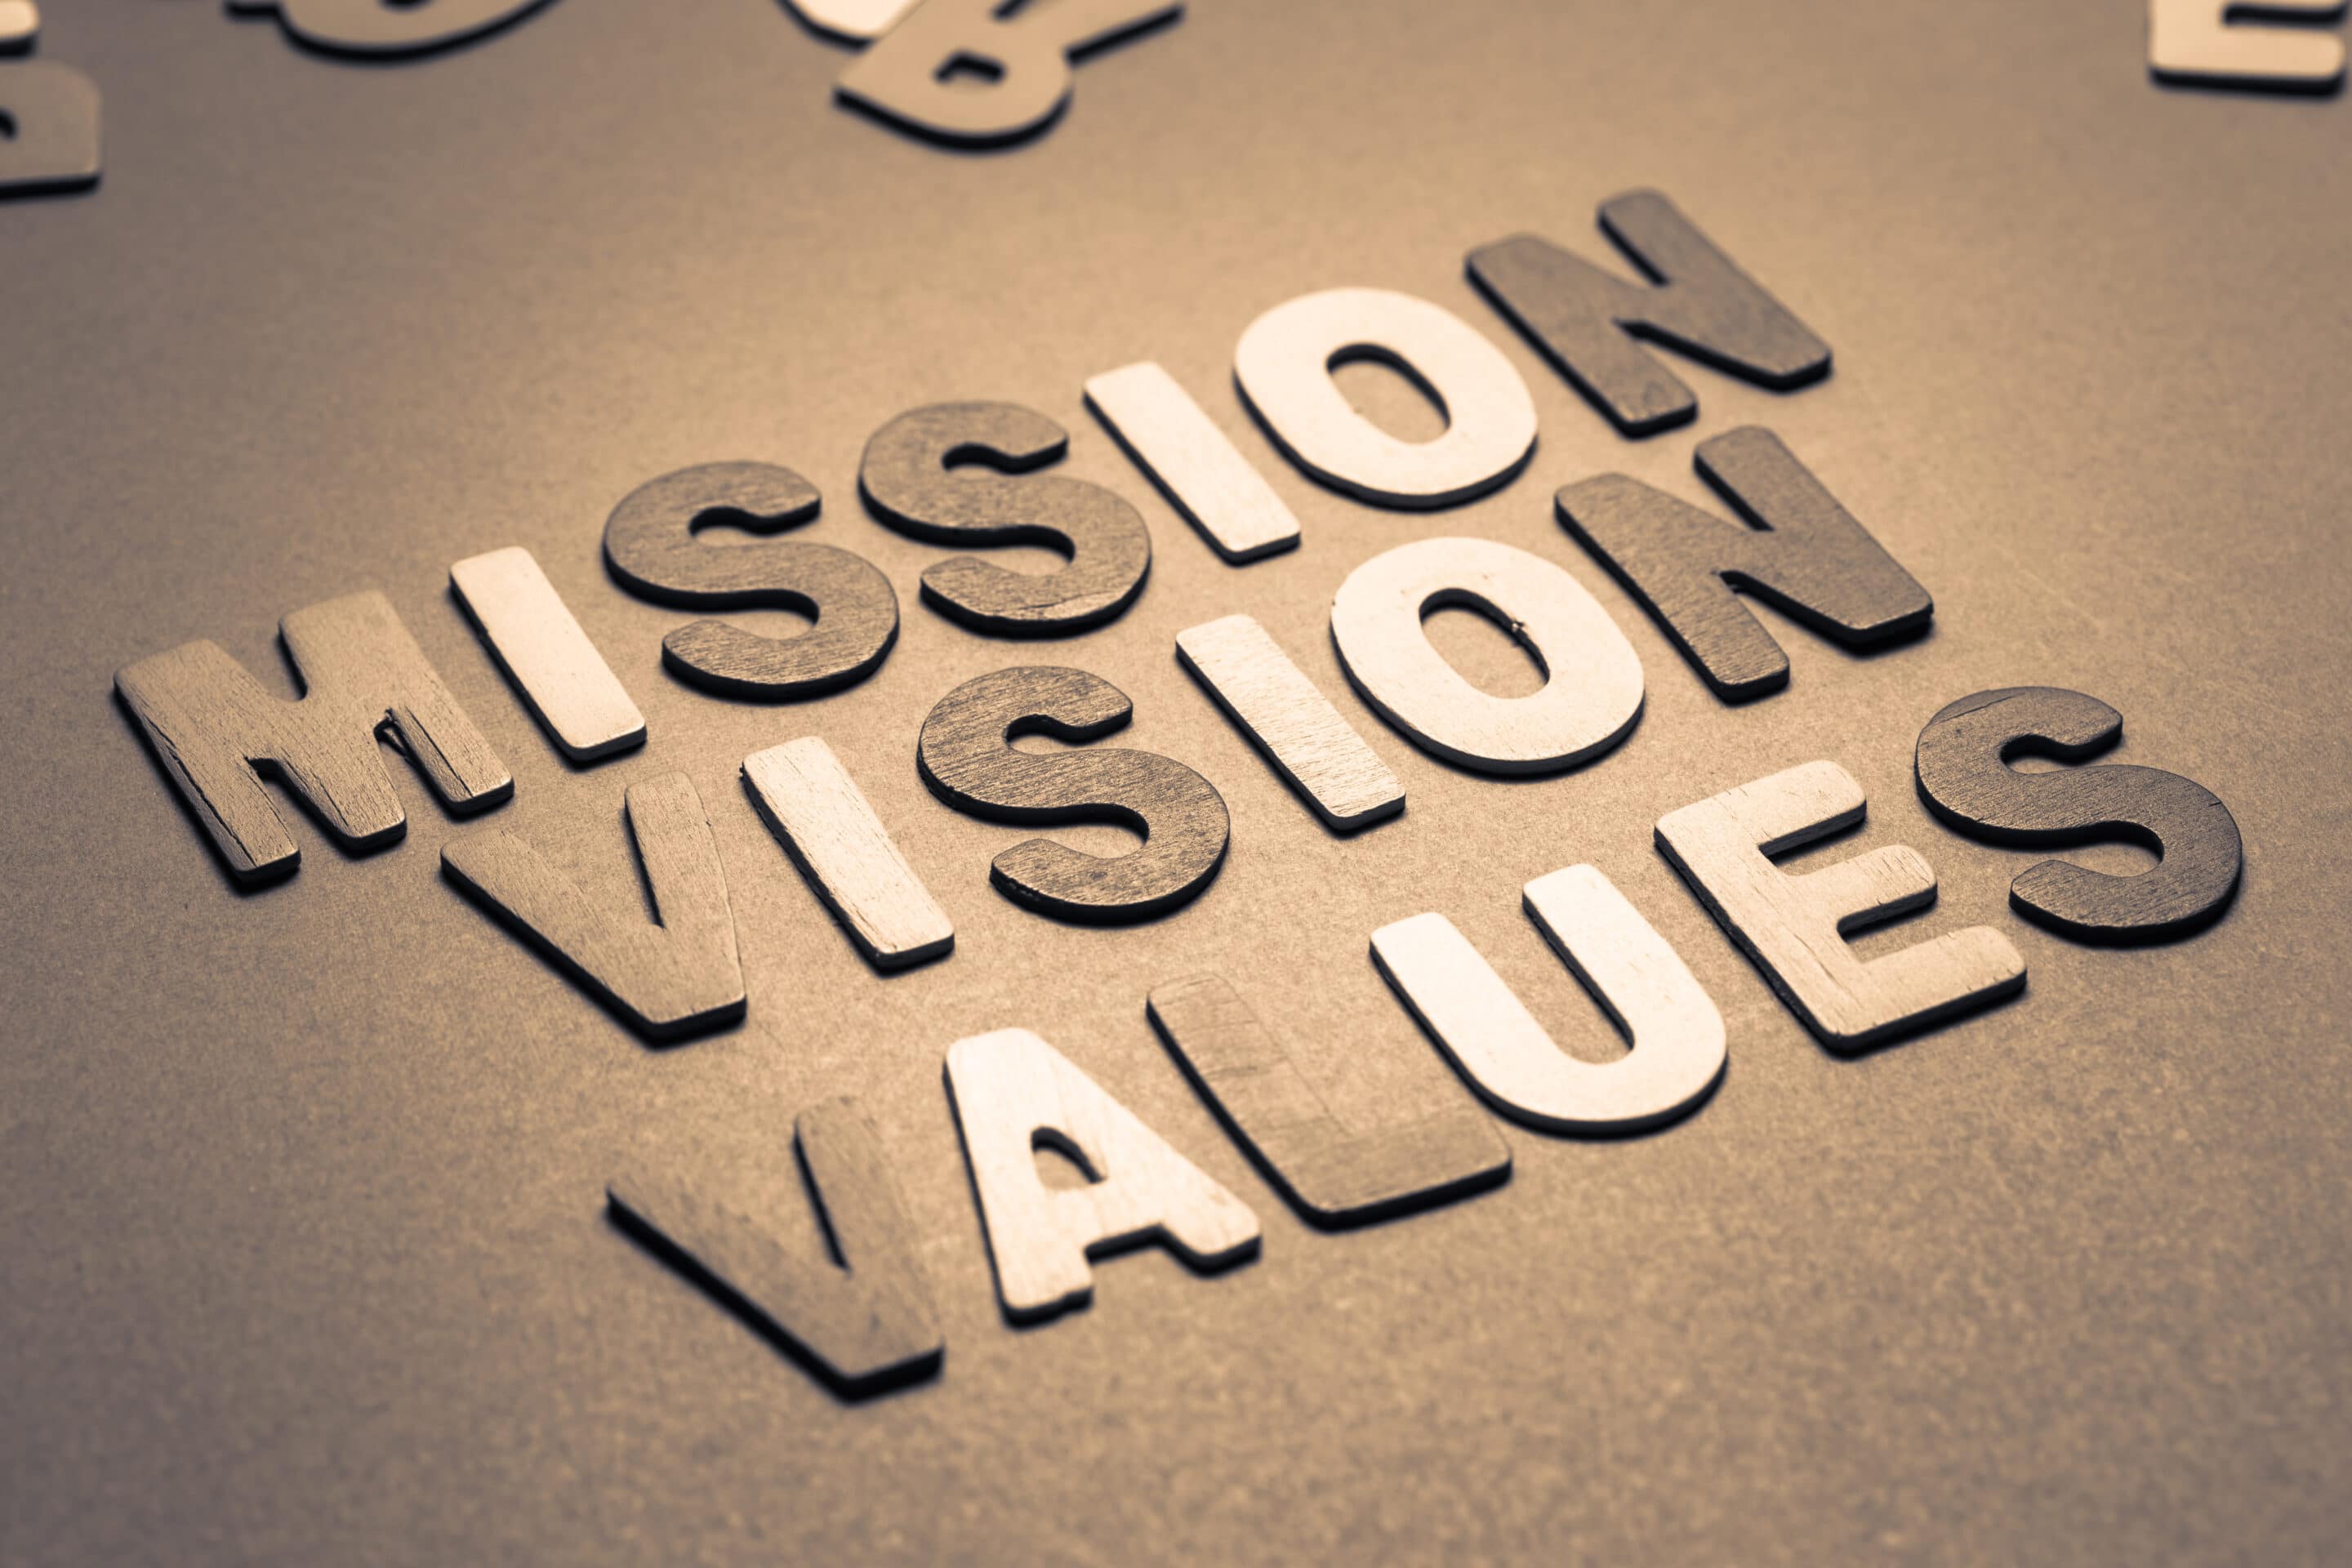 Defining your Mission, Vision and Values – it makes a huge difference!